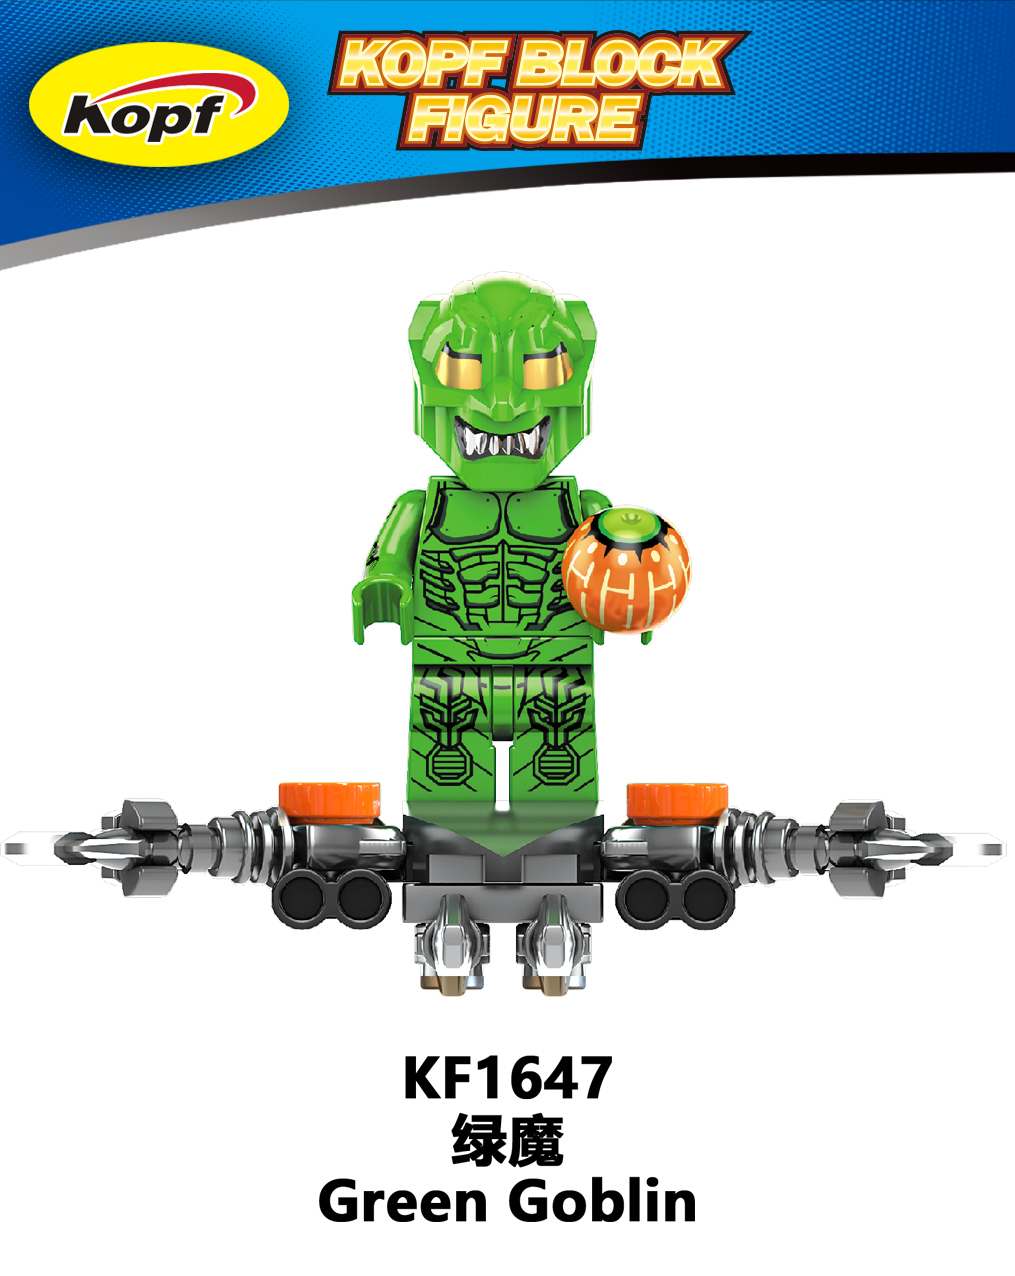 KF6159 KF1693 KF1694 KF1695 KF1696 KF1697 KF1698 KF1699 KF1700 Super Heroes Mini Building Spiderman Green Goblin Blocks Action Figures Educational Toys For Kids Gifts 